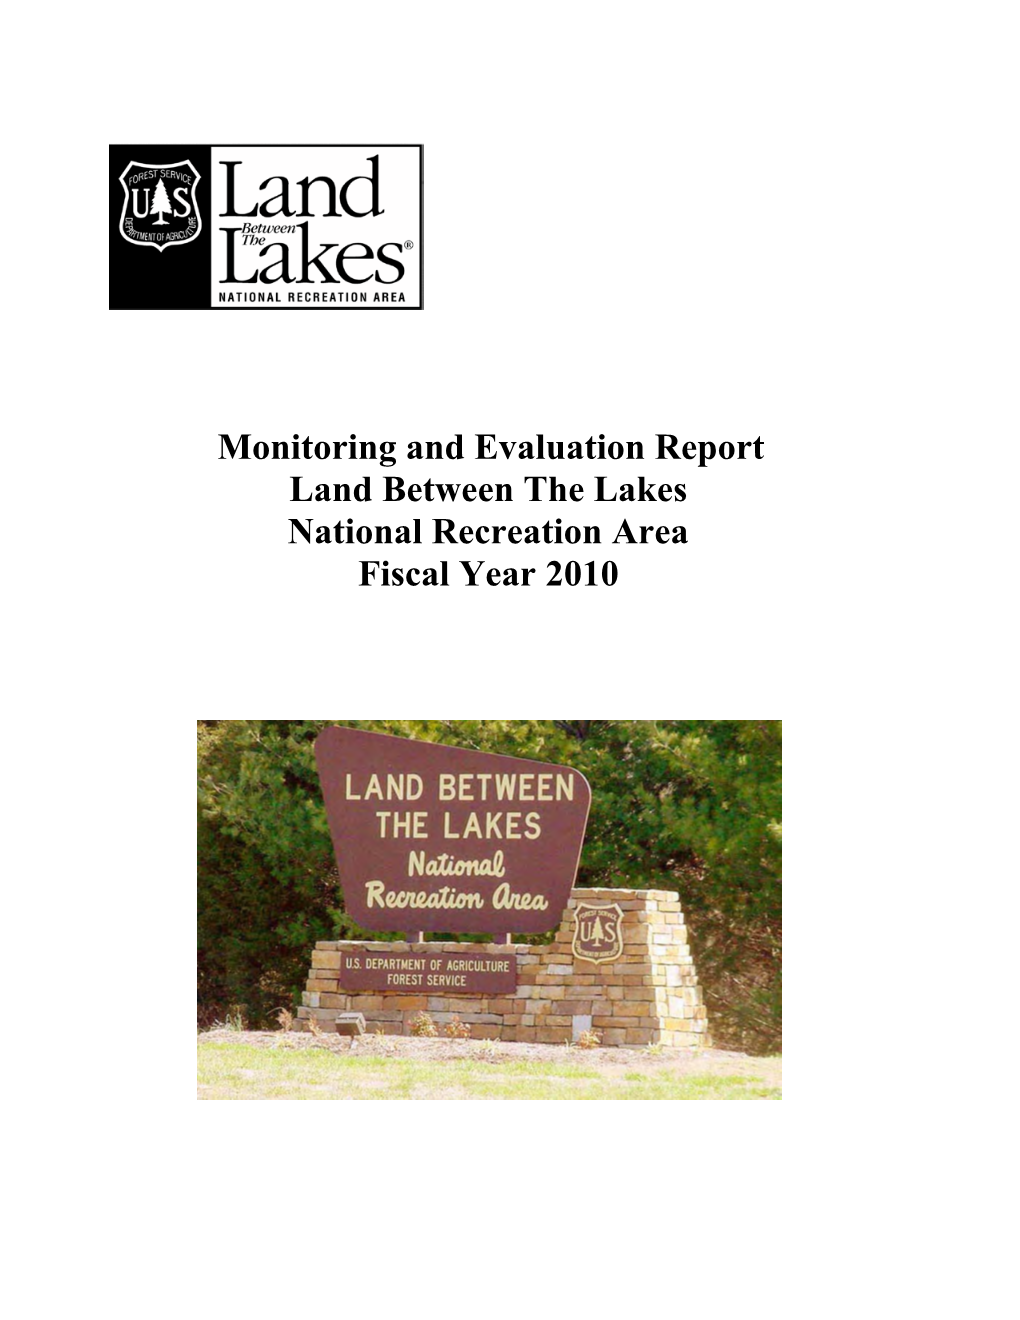 Monitoring and Evaluation Report Land Between the Lakes National Recreation Area Fiscal Year 2010